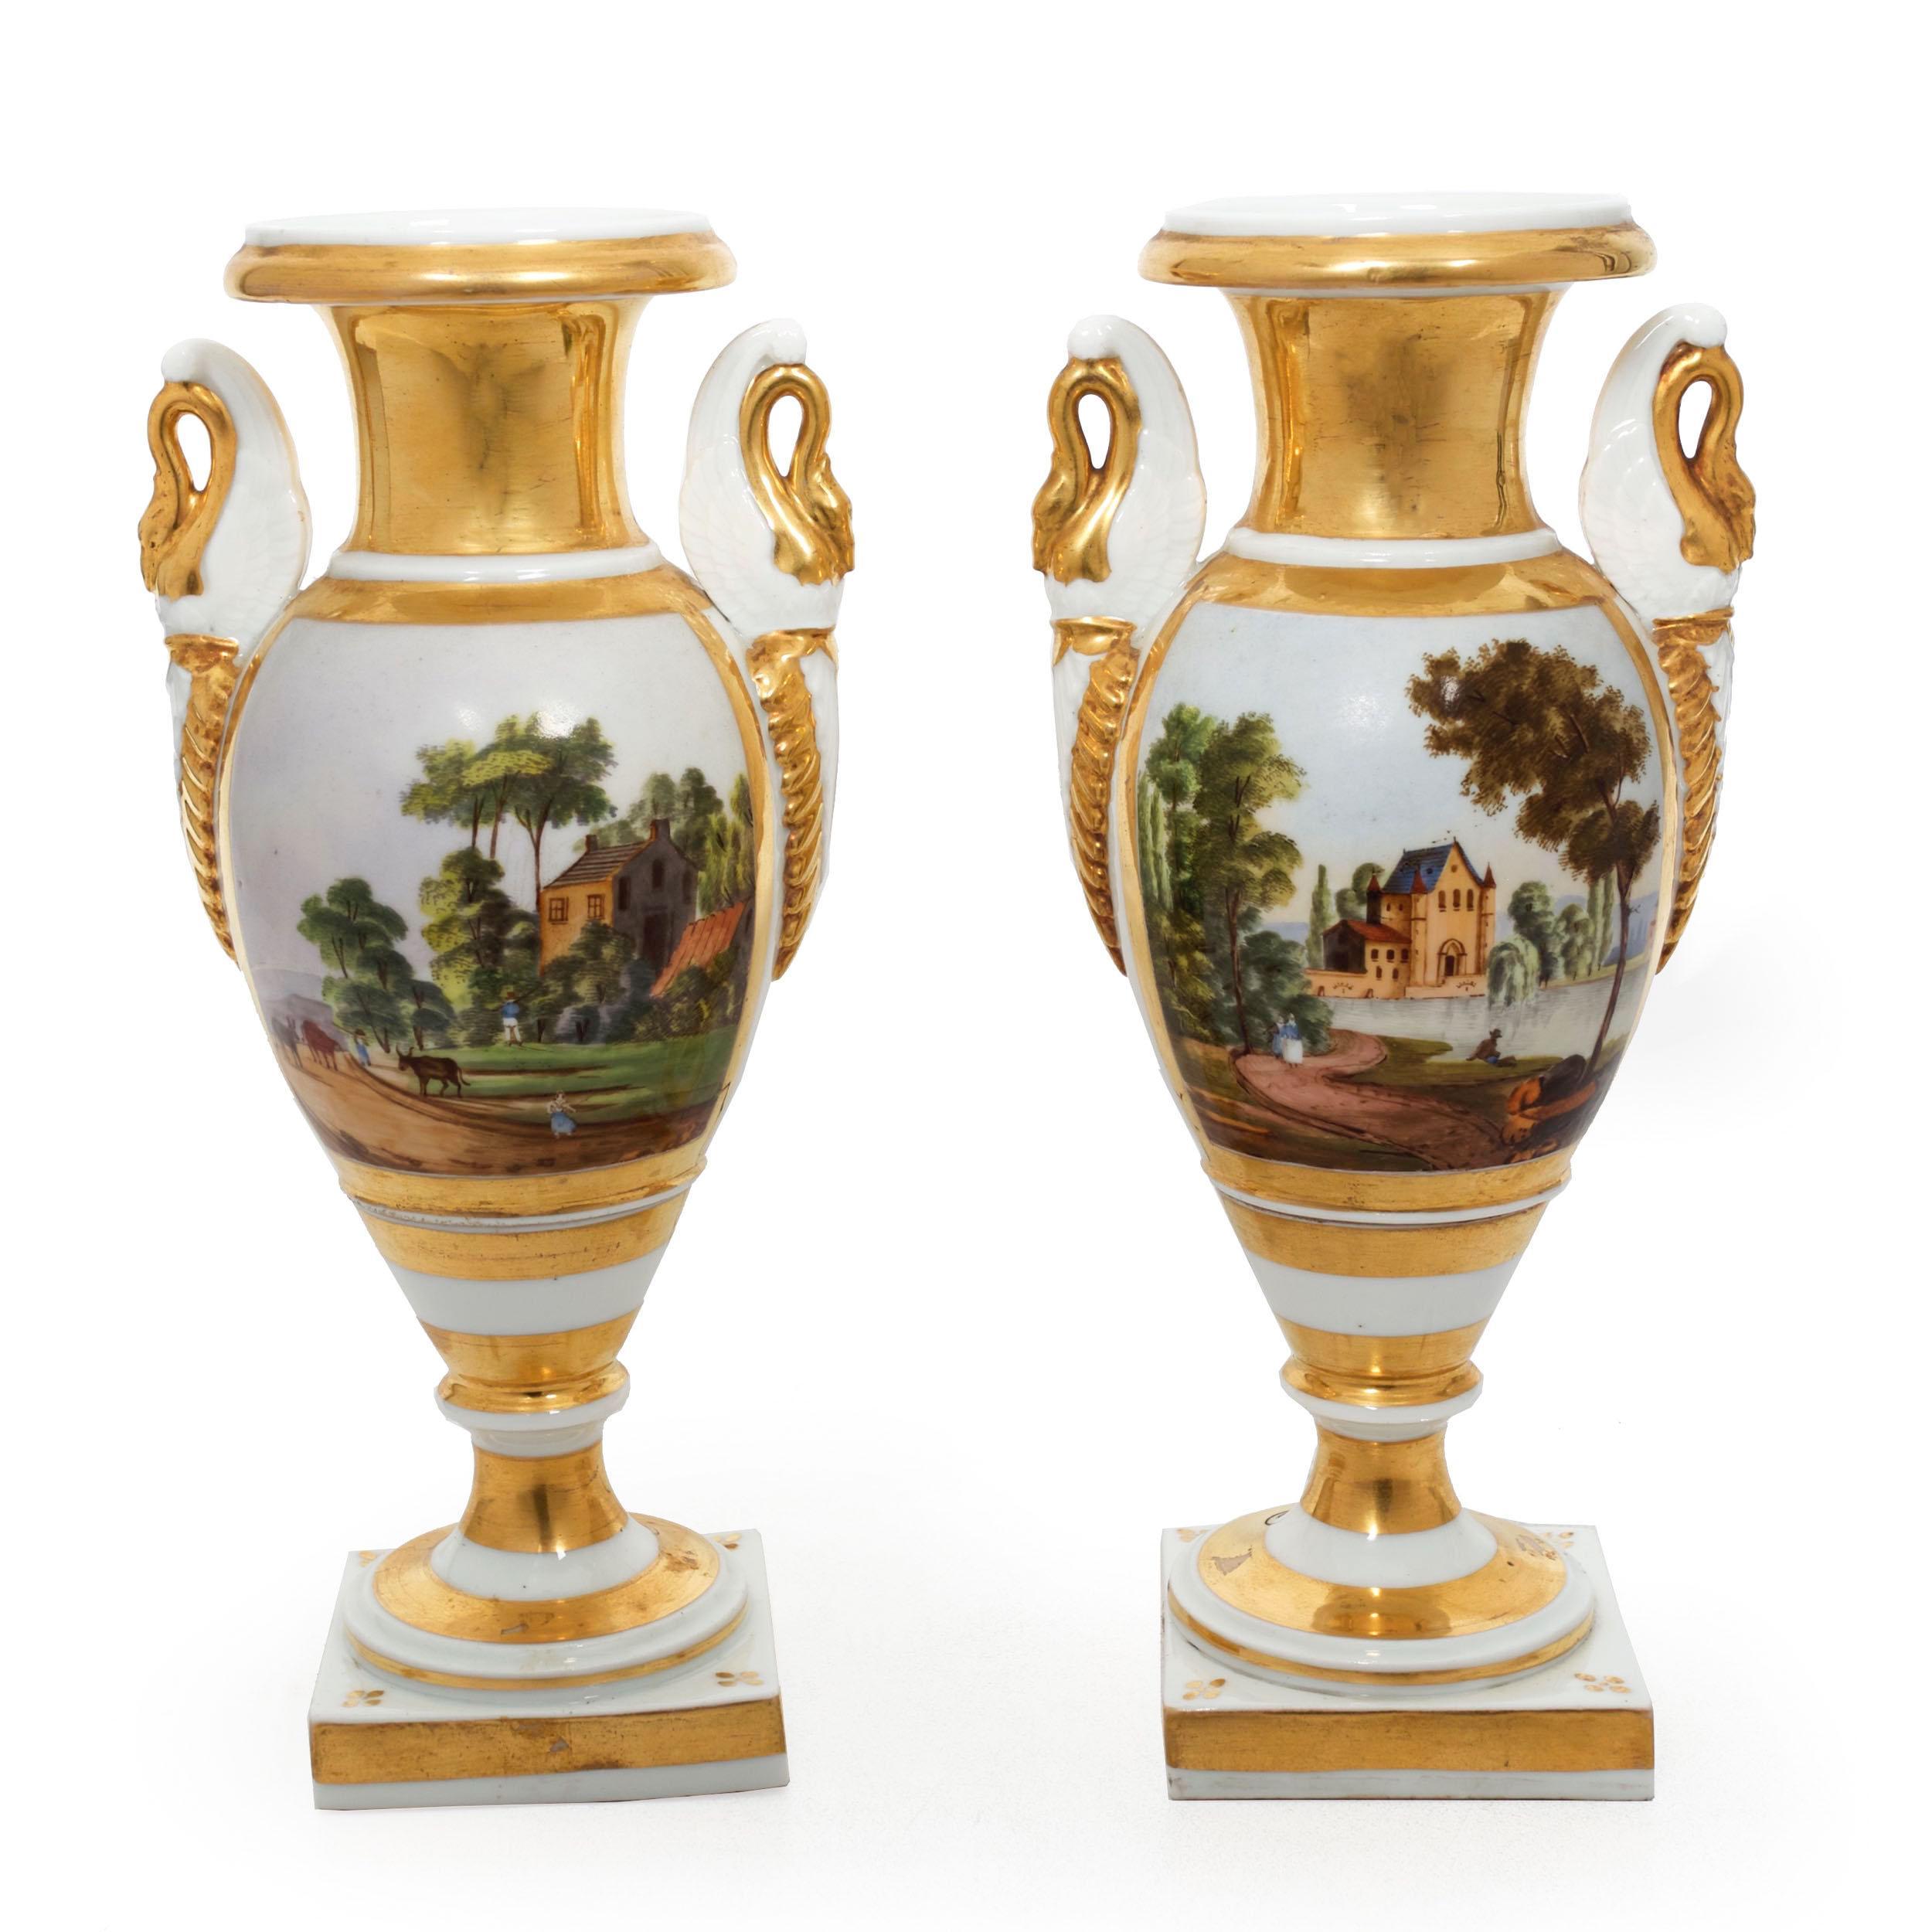 Romantic Pair of French Parisian Painted Porcelain Swan-Form Vases, 19th Century